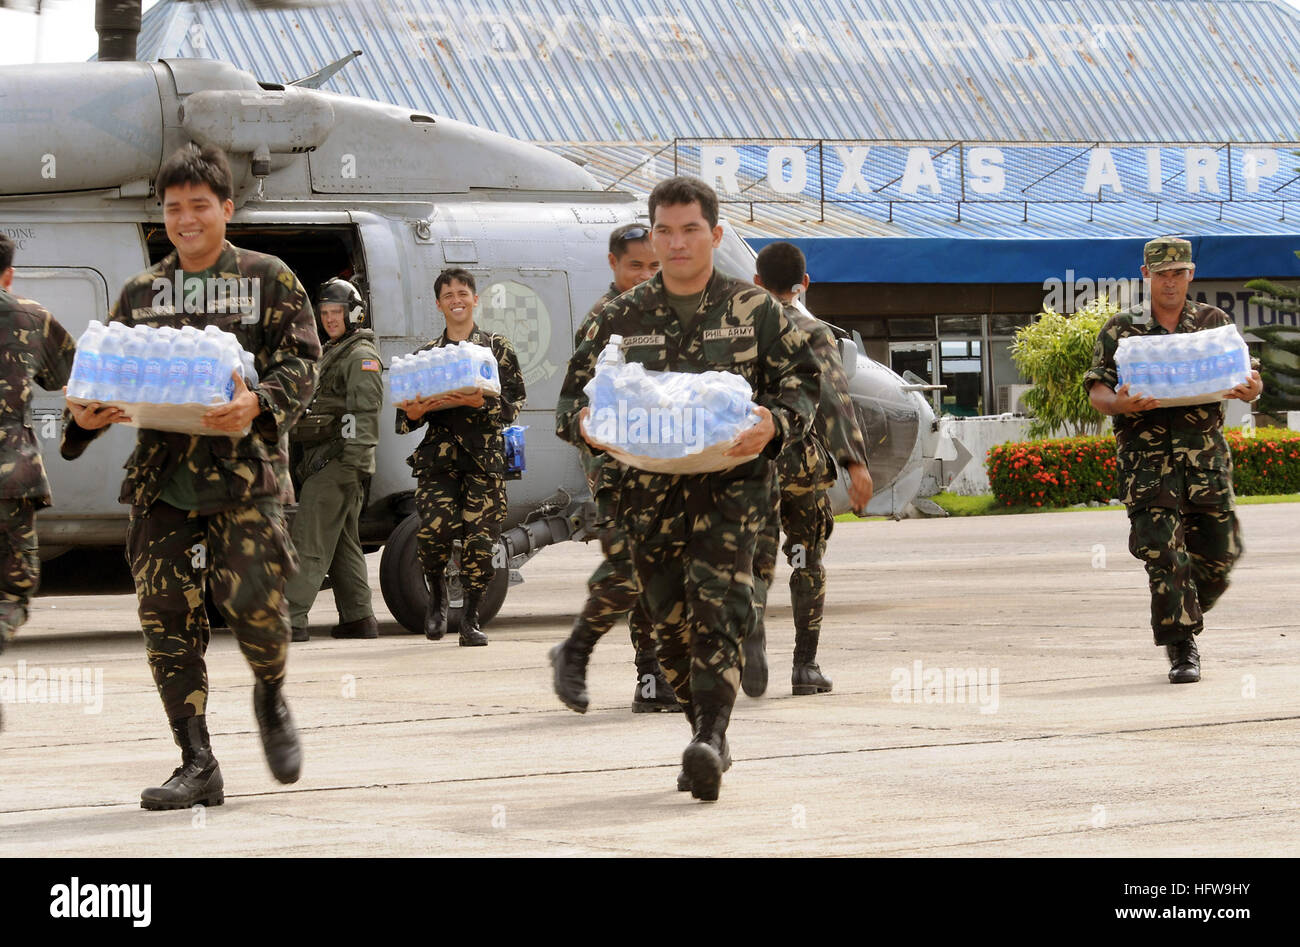 080626-N-5961C-003  ROXAS, Philippines (June 26, 2008) Servicemen of the Philippine Army transport bottled water from an SH-60 helicopter assigned to Helicopter Anti-Submarine Squadron (HS) 4 at Roxas airport. The U.S. Navy and the Philippine Army and Air Force have been working side by side during disaster relief efforts in the wake of Typhoon Fengshen. At the request of the government of the Republic of the Philippines, the Nimitz-class aircraft carrier USS Ronald Reagan (CVN 76) is off the coast of Panay Island providing humanitarian assistance and disaster response. Ronald Reagan and other Stock Photo